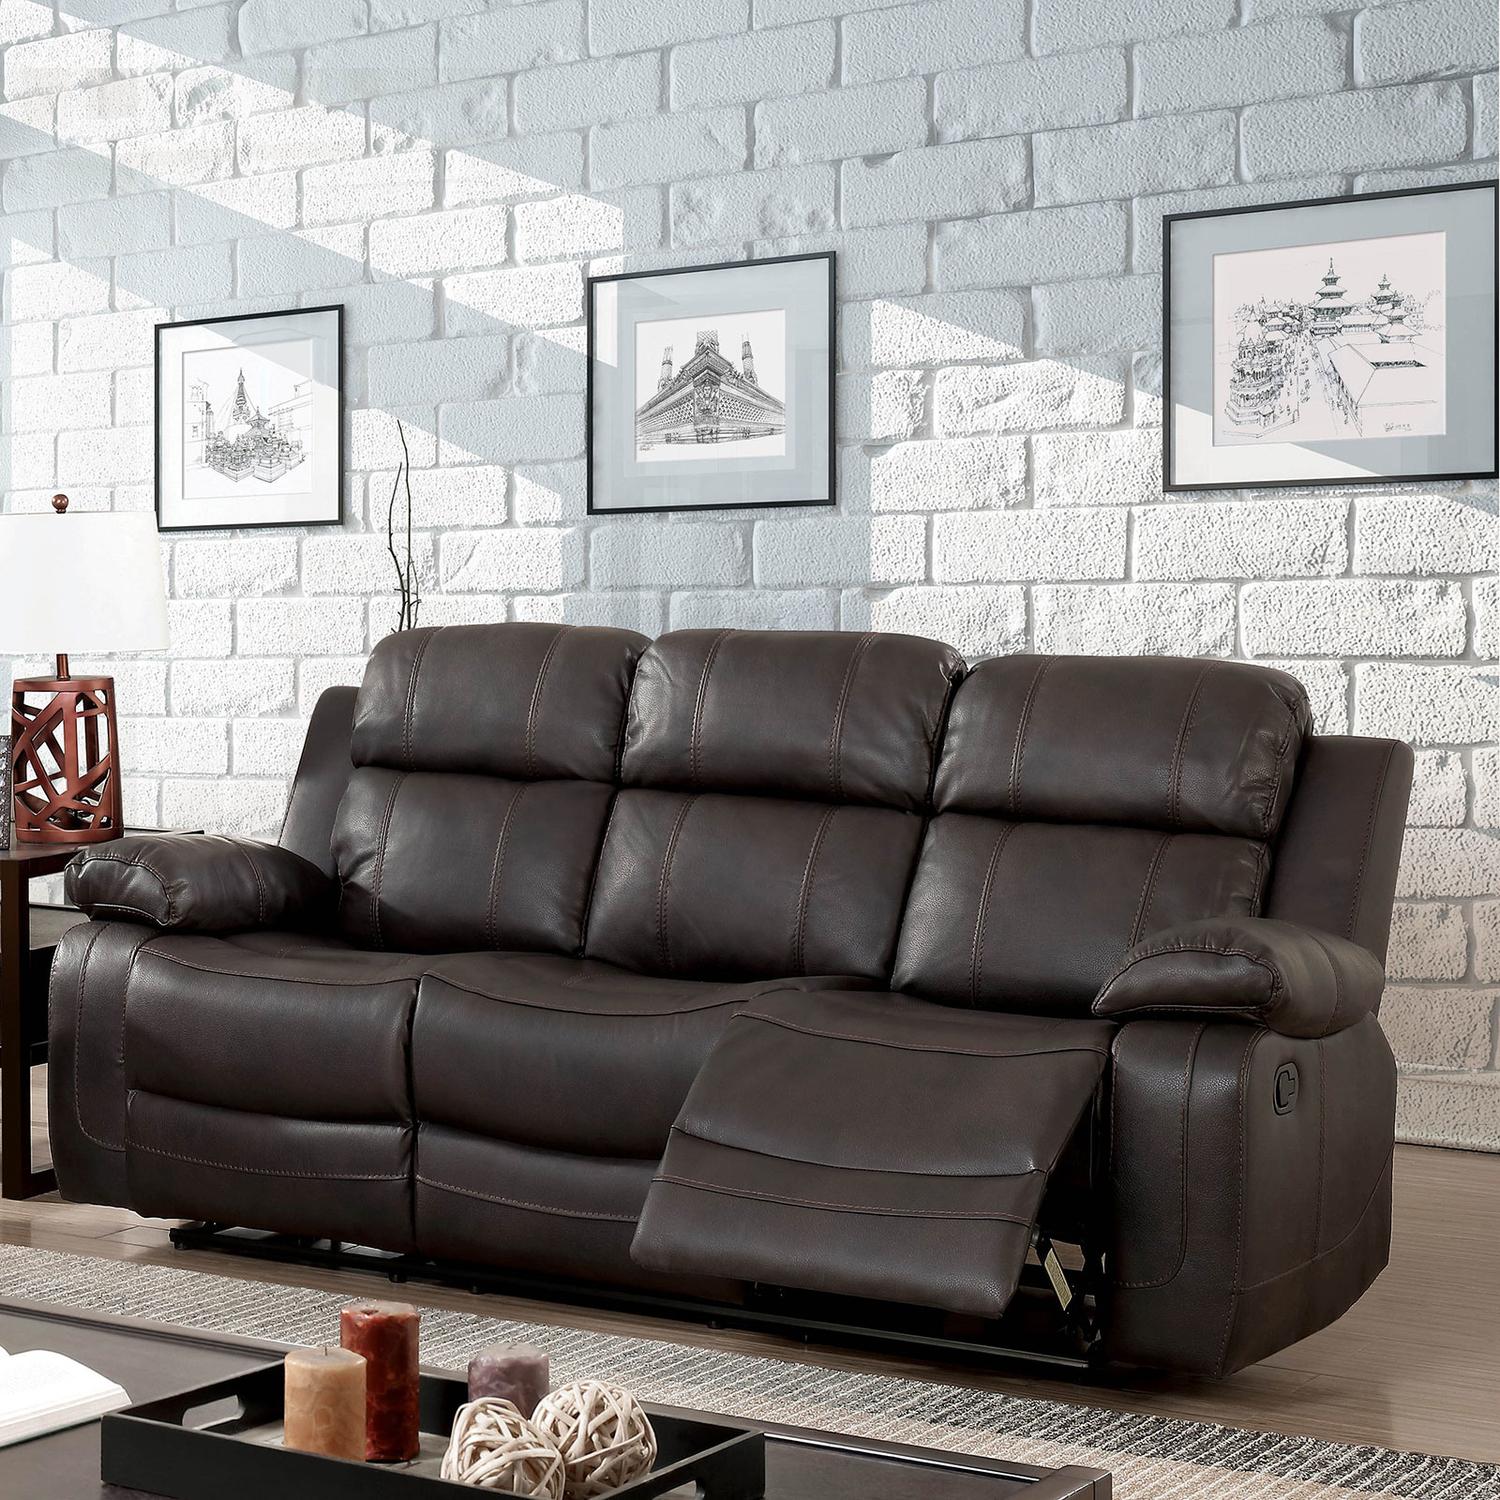 

    
CM6568-3PC Pondera Recliner Sofa Loveseat and Chair
